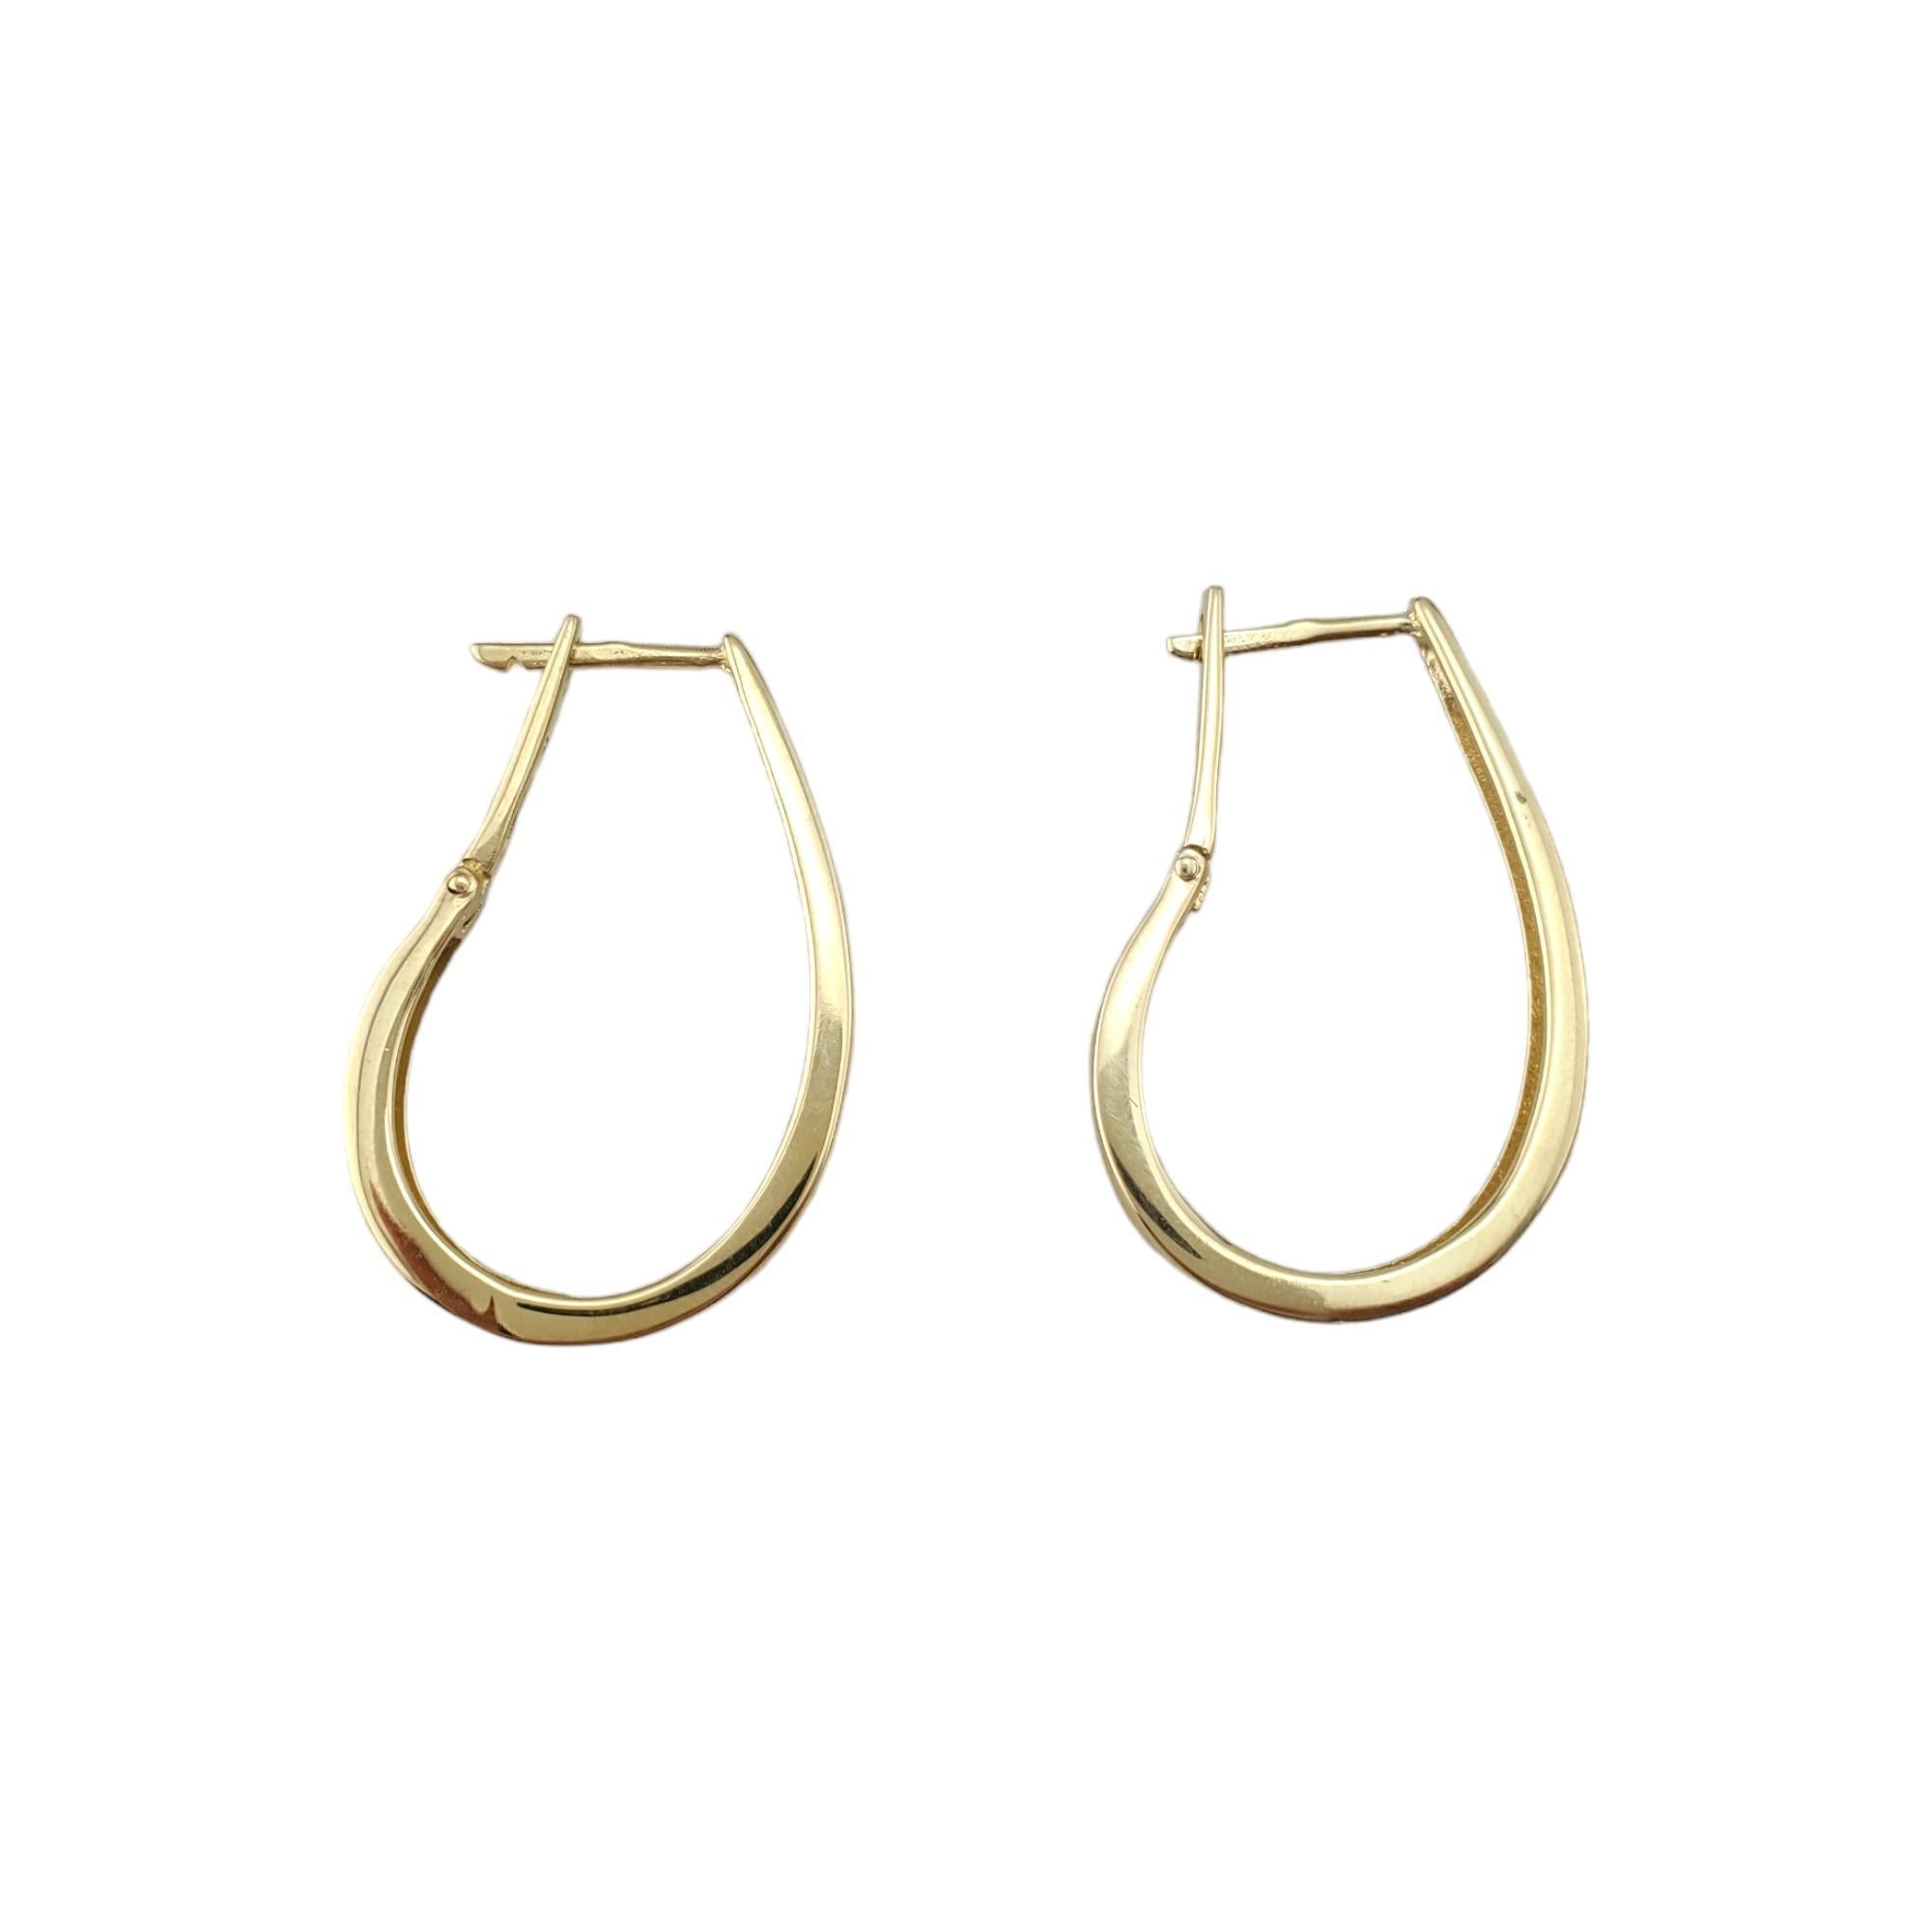 14K Yellow Gold Long Oval Hoop Earrings 

Simply elegant oval hoop earrings in 14K yellow gold with flip-up back closure. 

Hallmark: 14K

Weight: 5.9 g/ 3.8 dwt.

Size: 30.9 mm X 3.8 mm X 2.7 mm

Very good condition, professionally polished.

Will